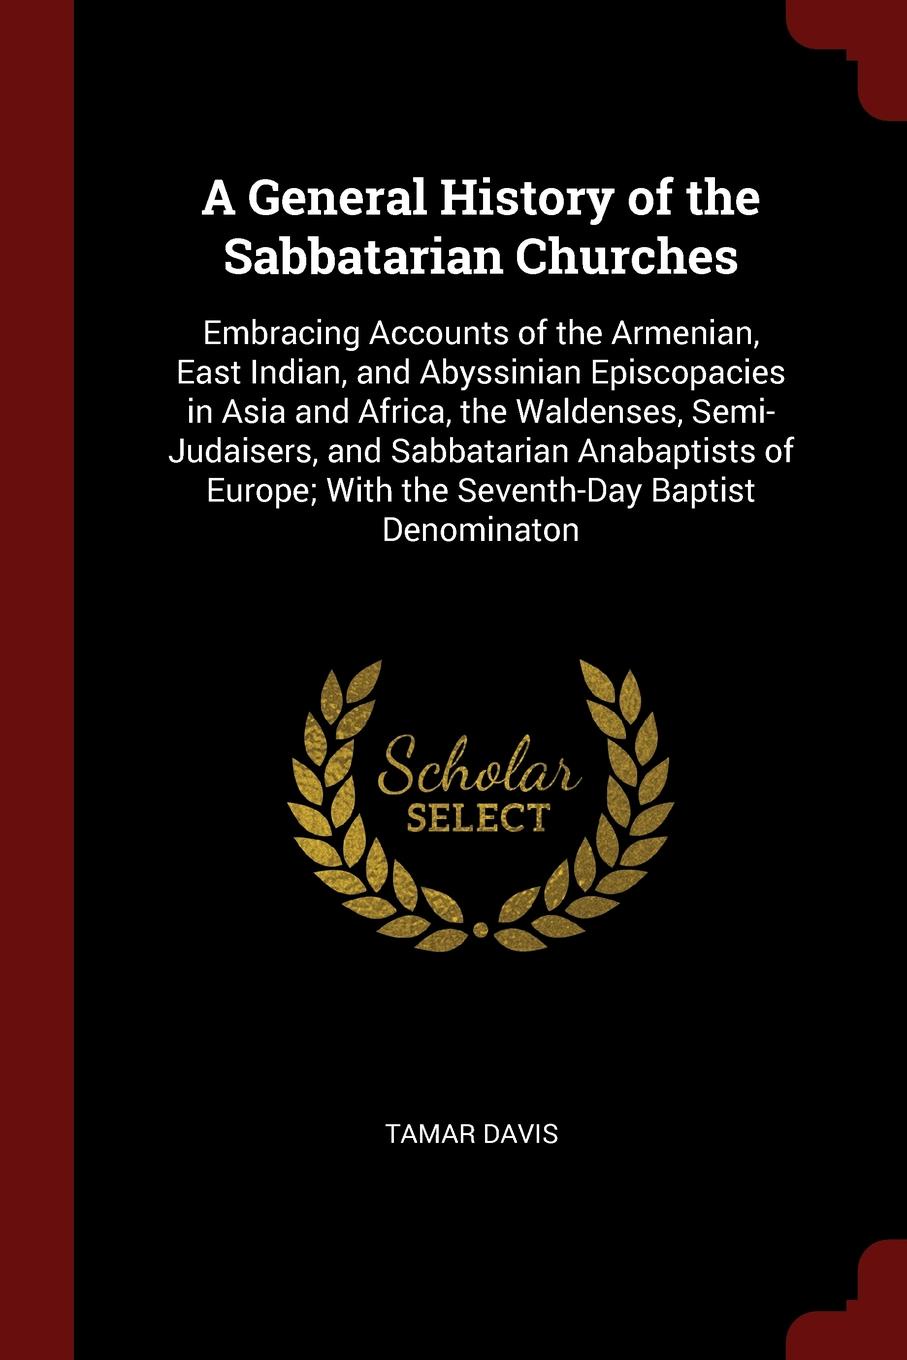 A General History of the Sabbatarian Churches. Embracing Accounts of the Armenian, East Indian, and Abyssinian Episcopacies in Asia and Africa, the Waldenses, Semi-Judaisers, and Sabbatarian Anabaptists of Europe; With the Seventh-Day Baptist Deno...